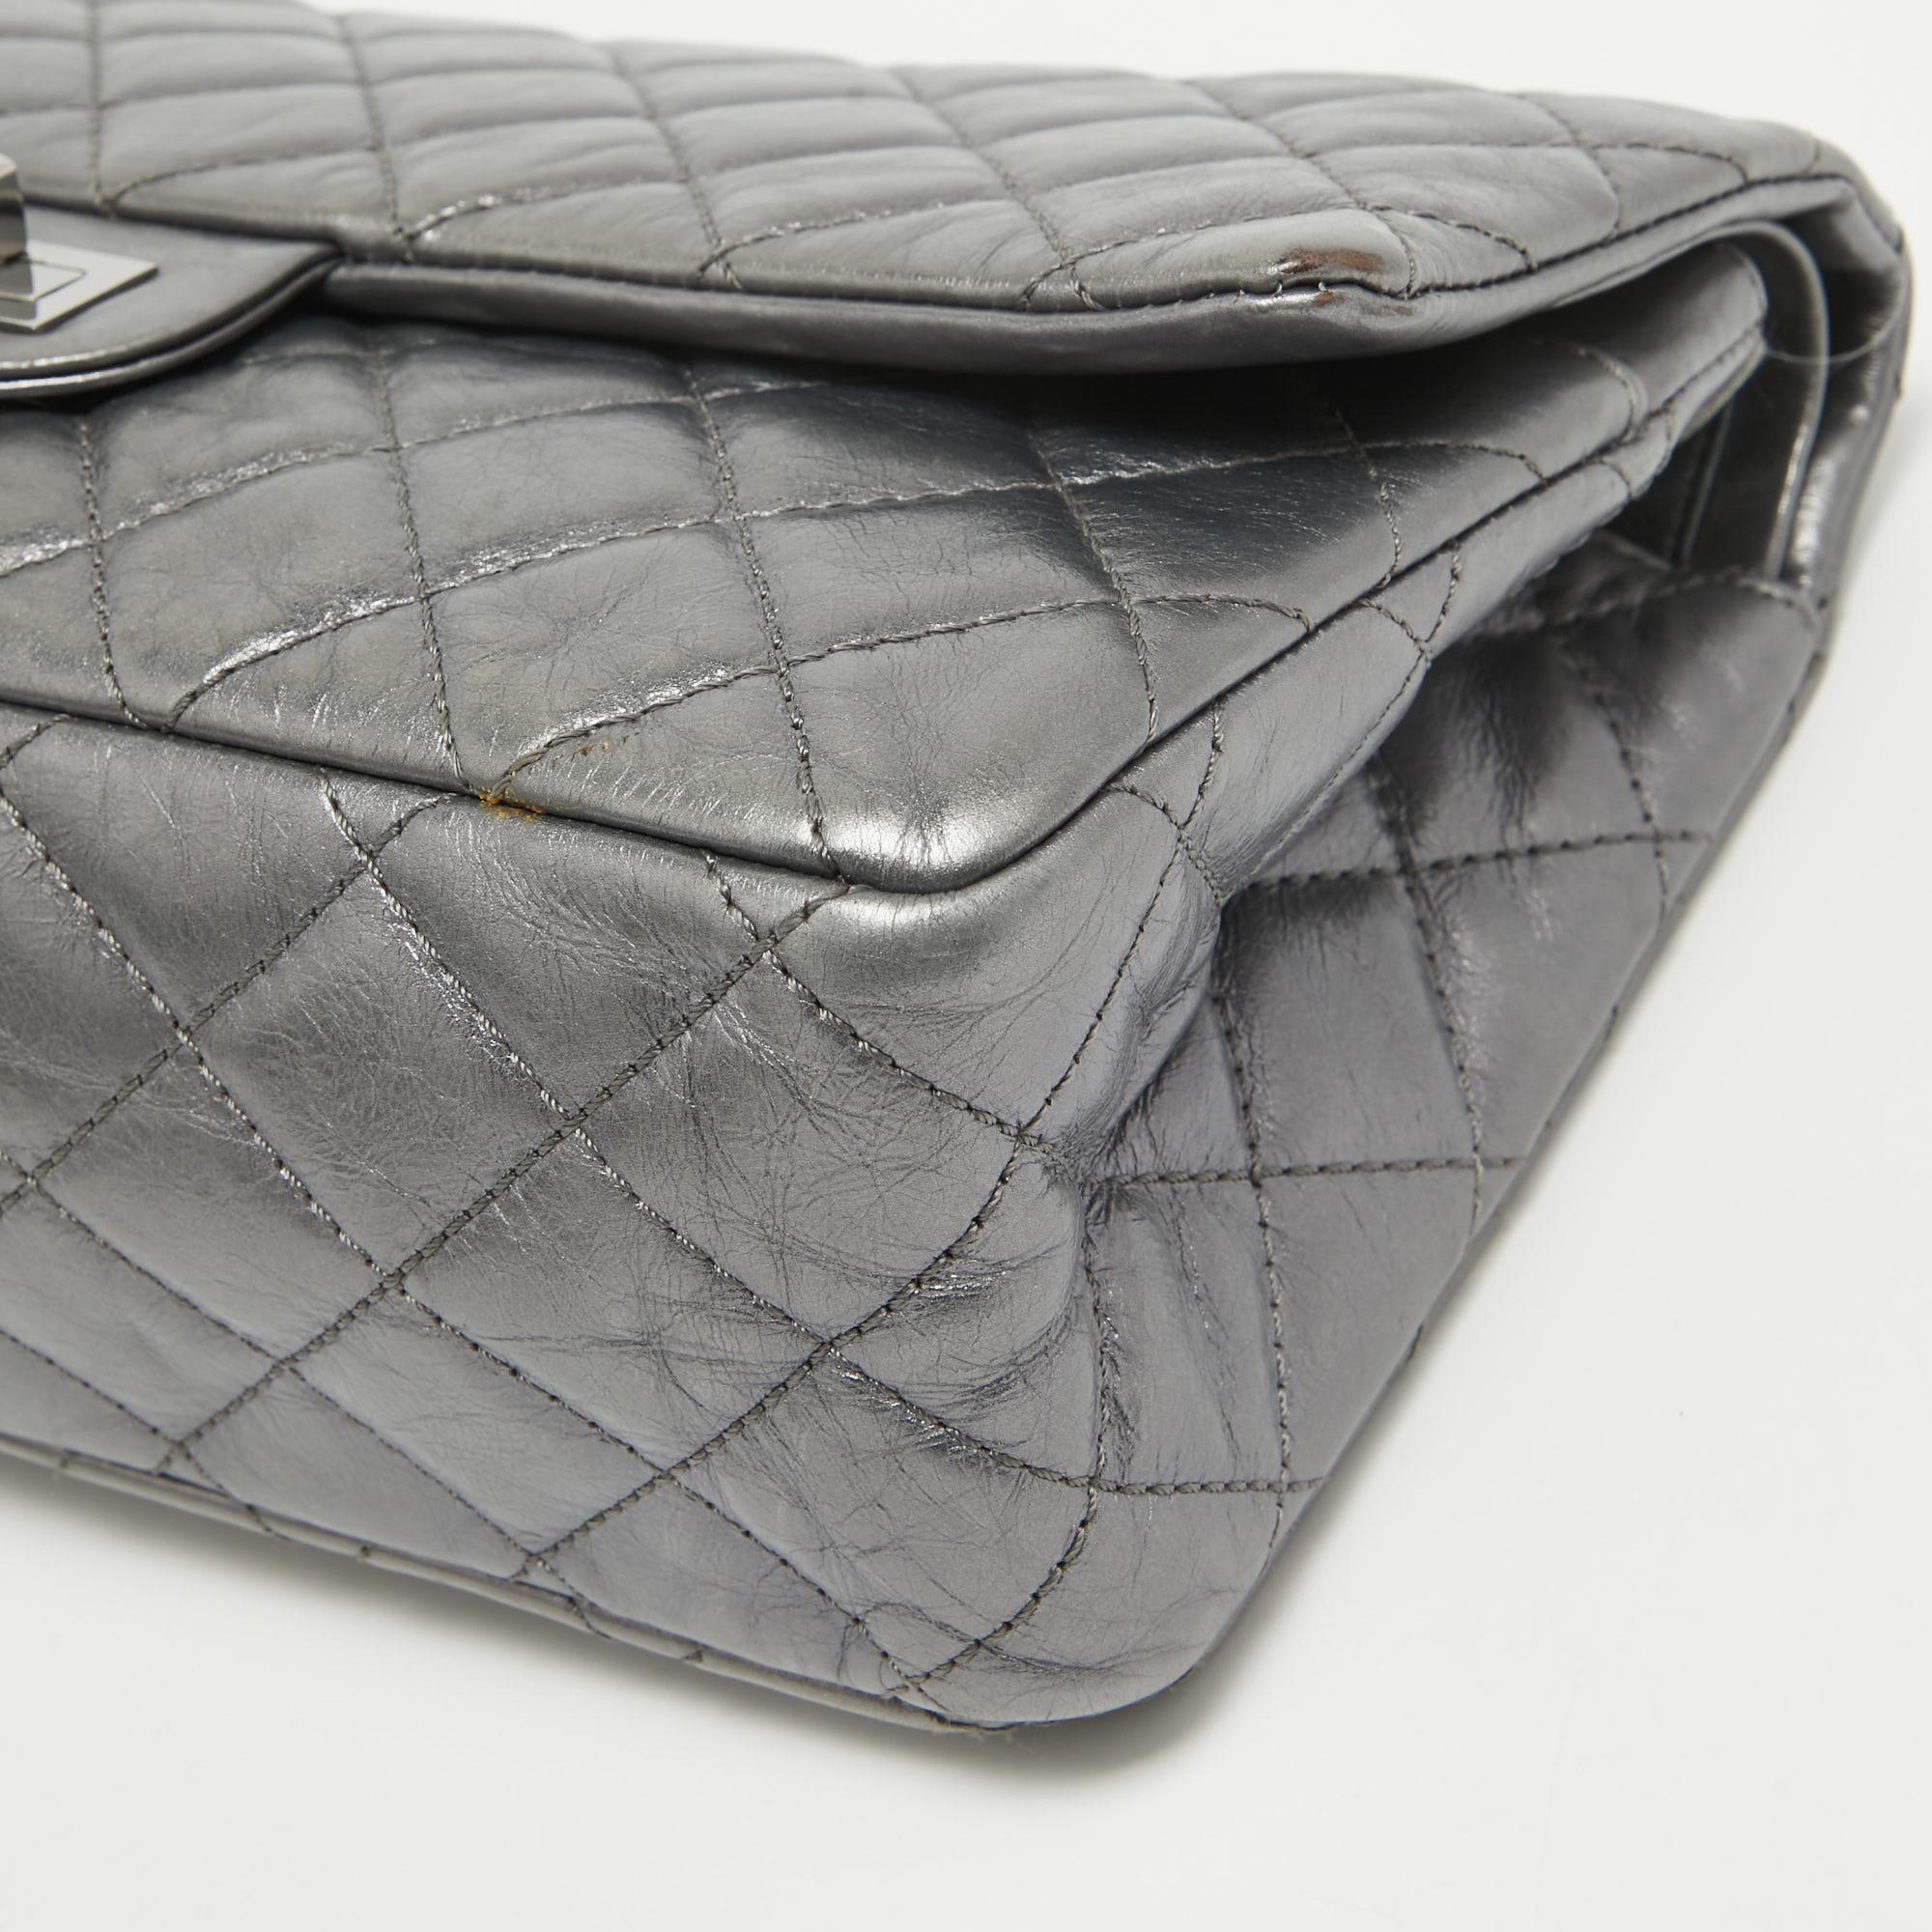 Chanel Metallic Grey Quilted Leather 226 Reissue 2.55 Flap Bag For Sale 7